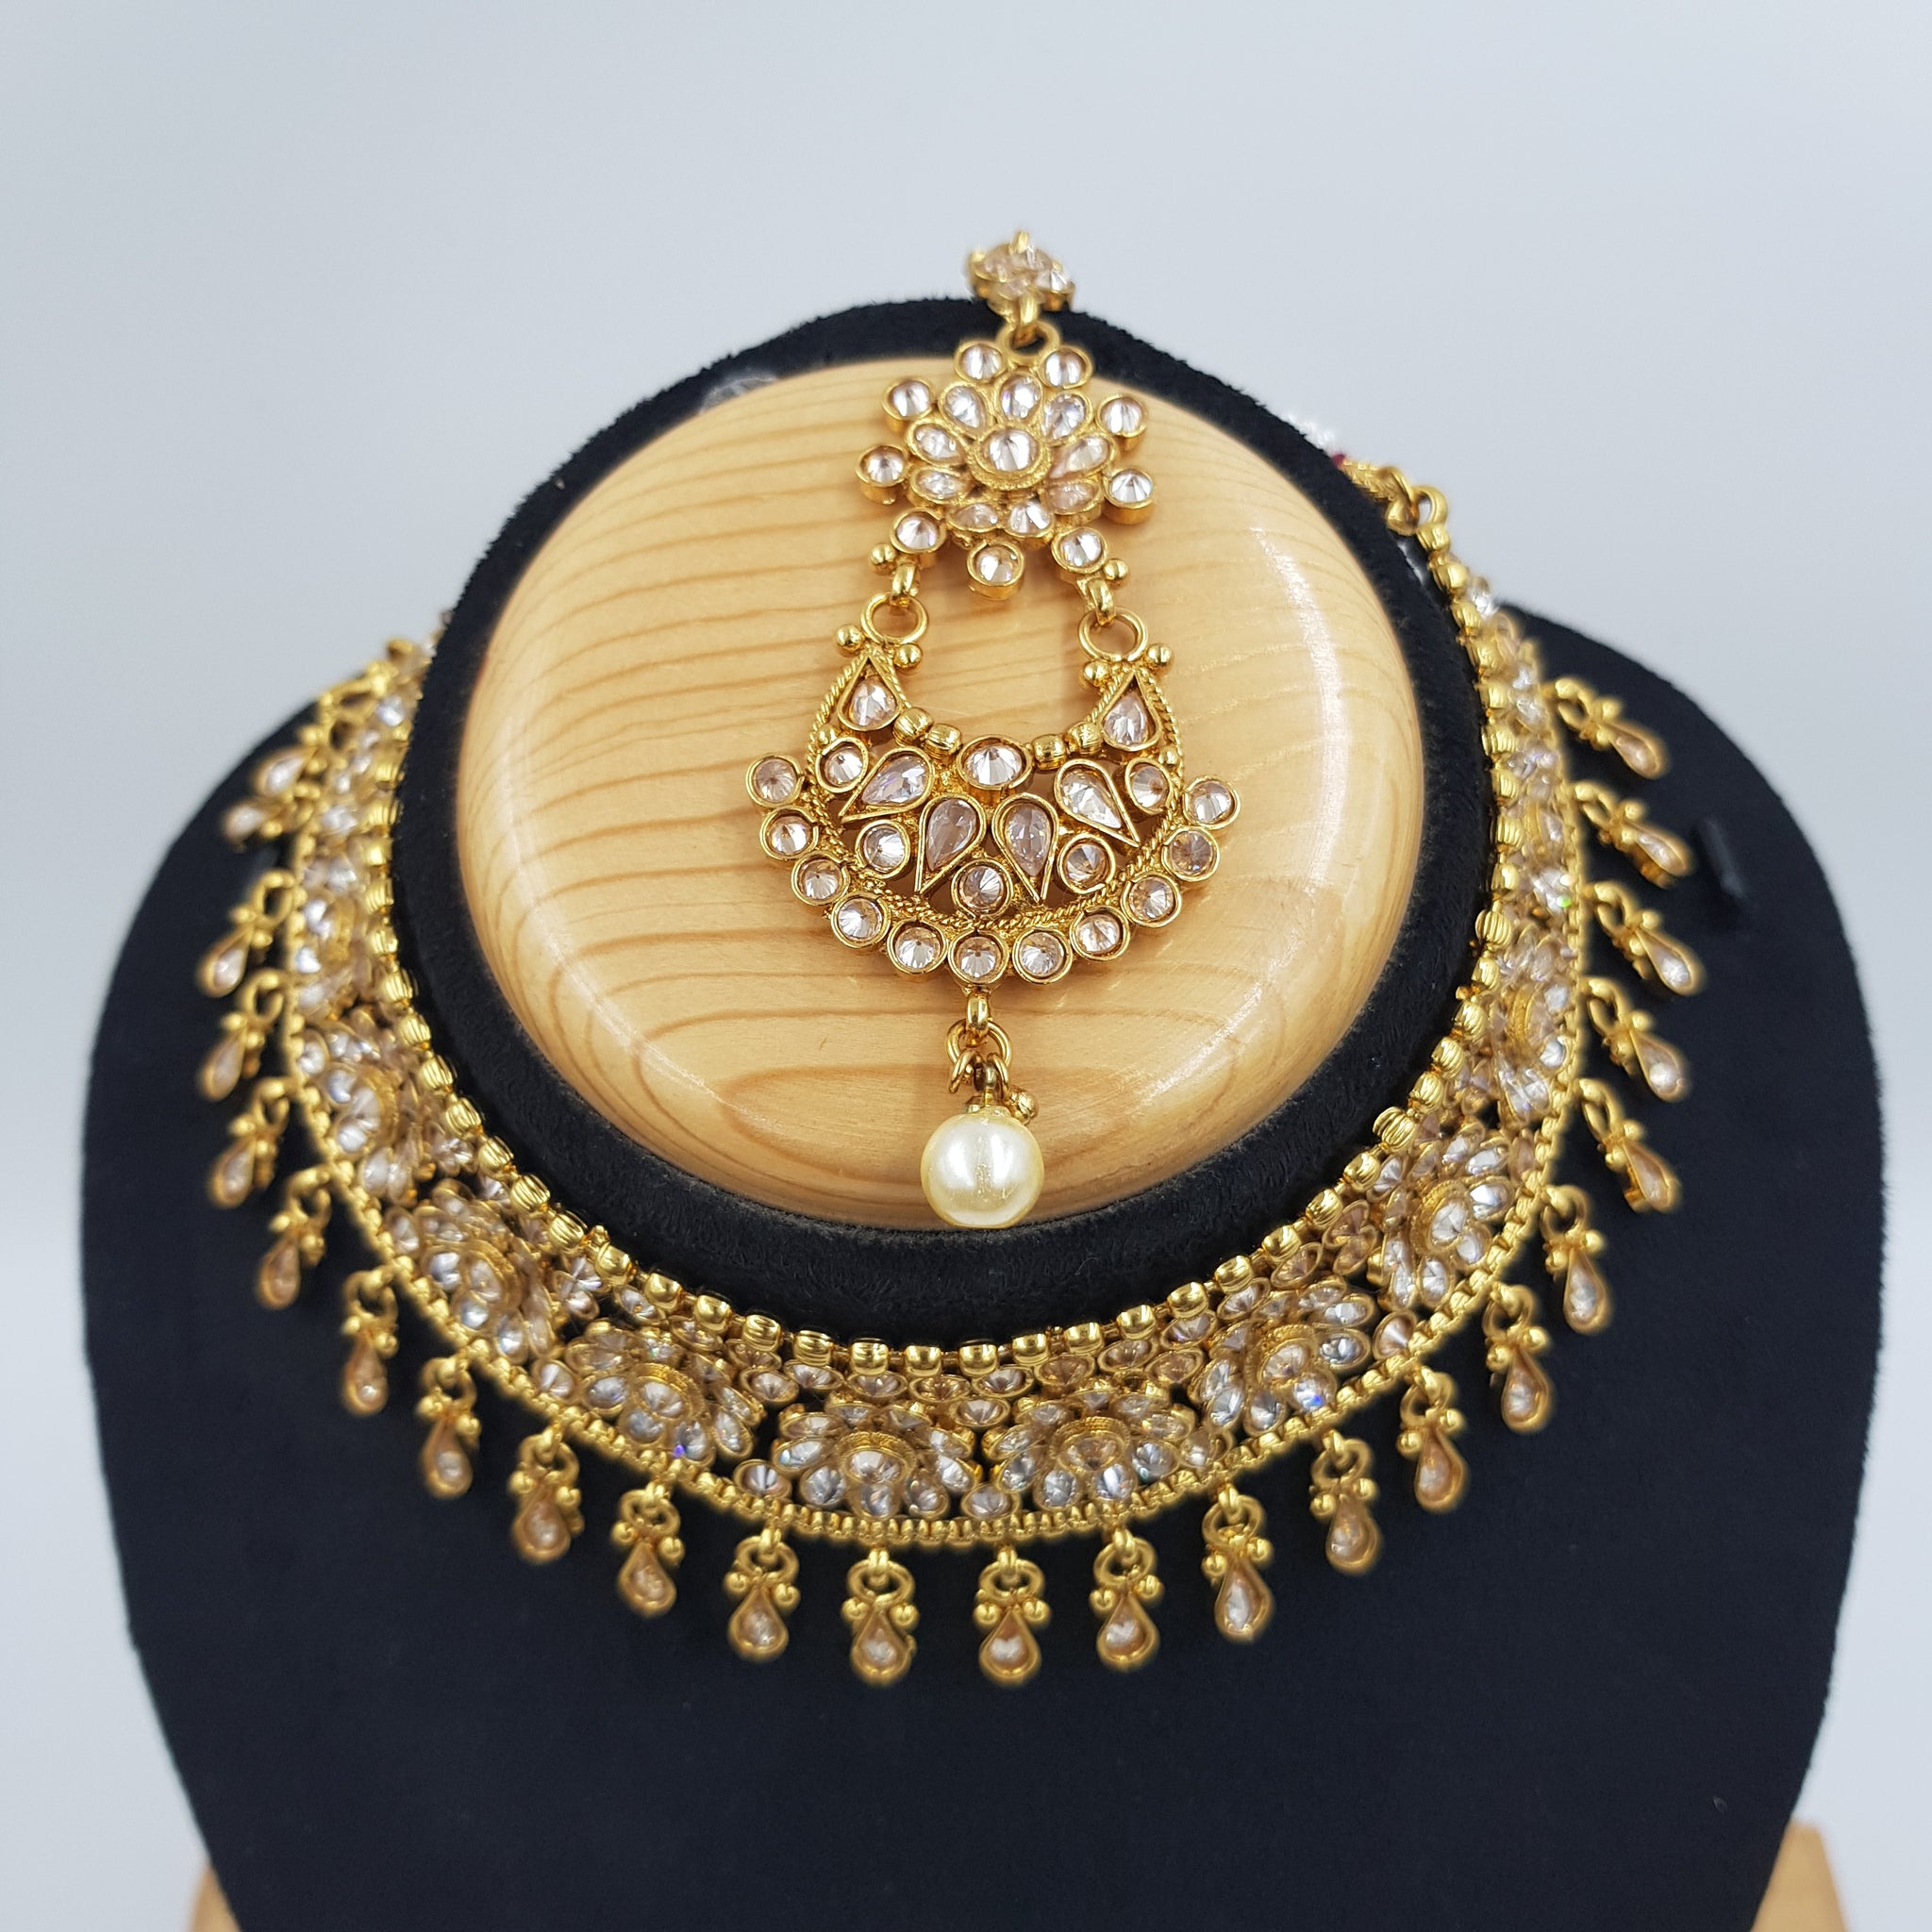 Gold Gold Look Necklace Set